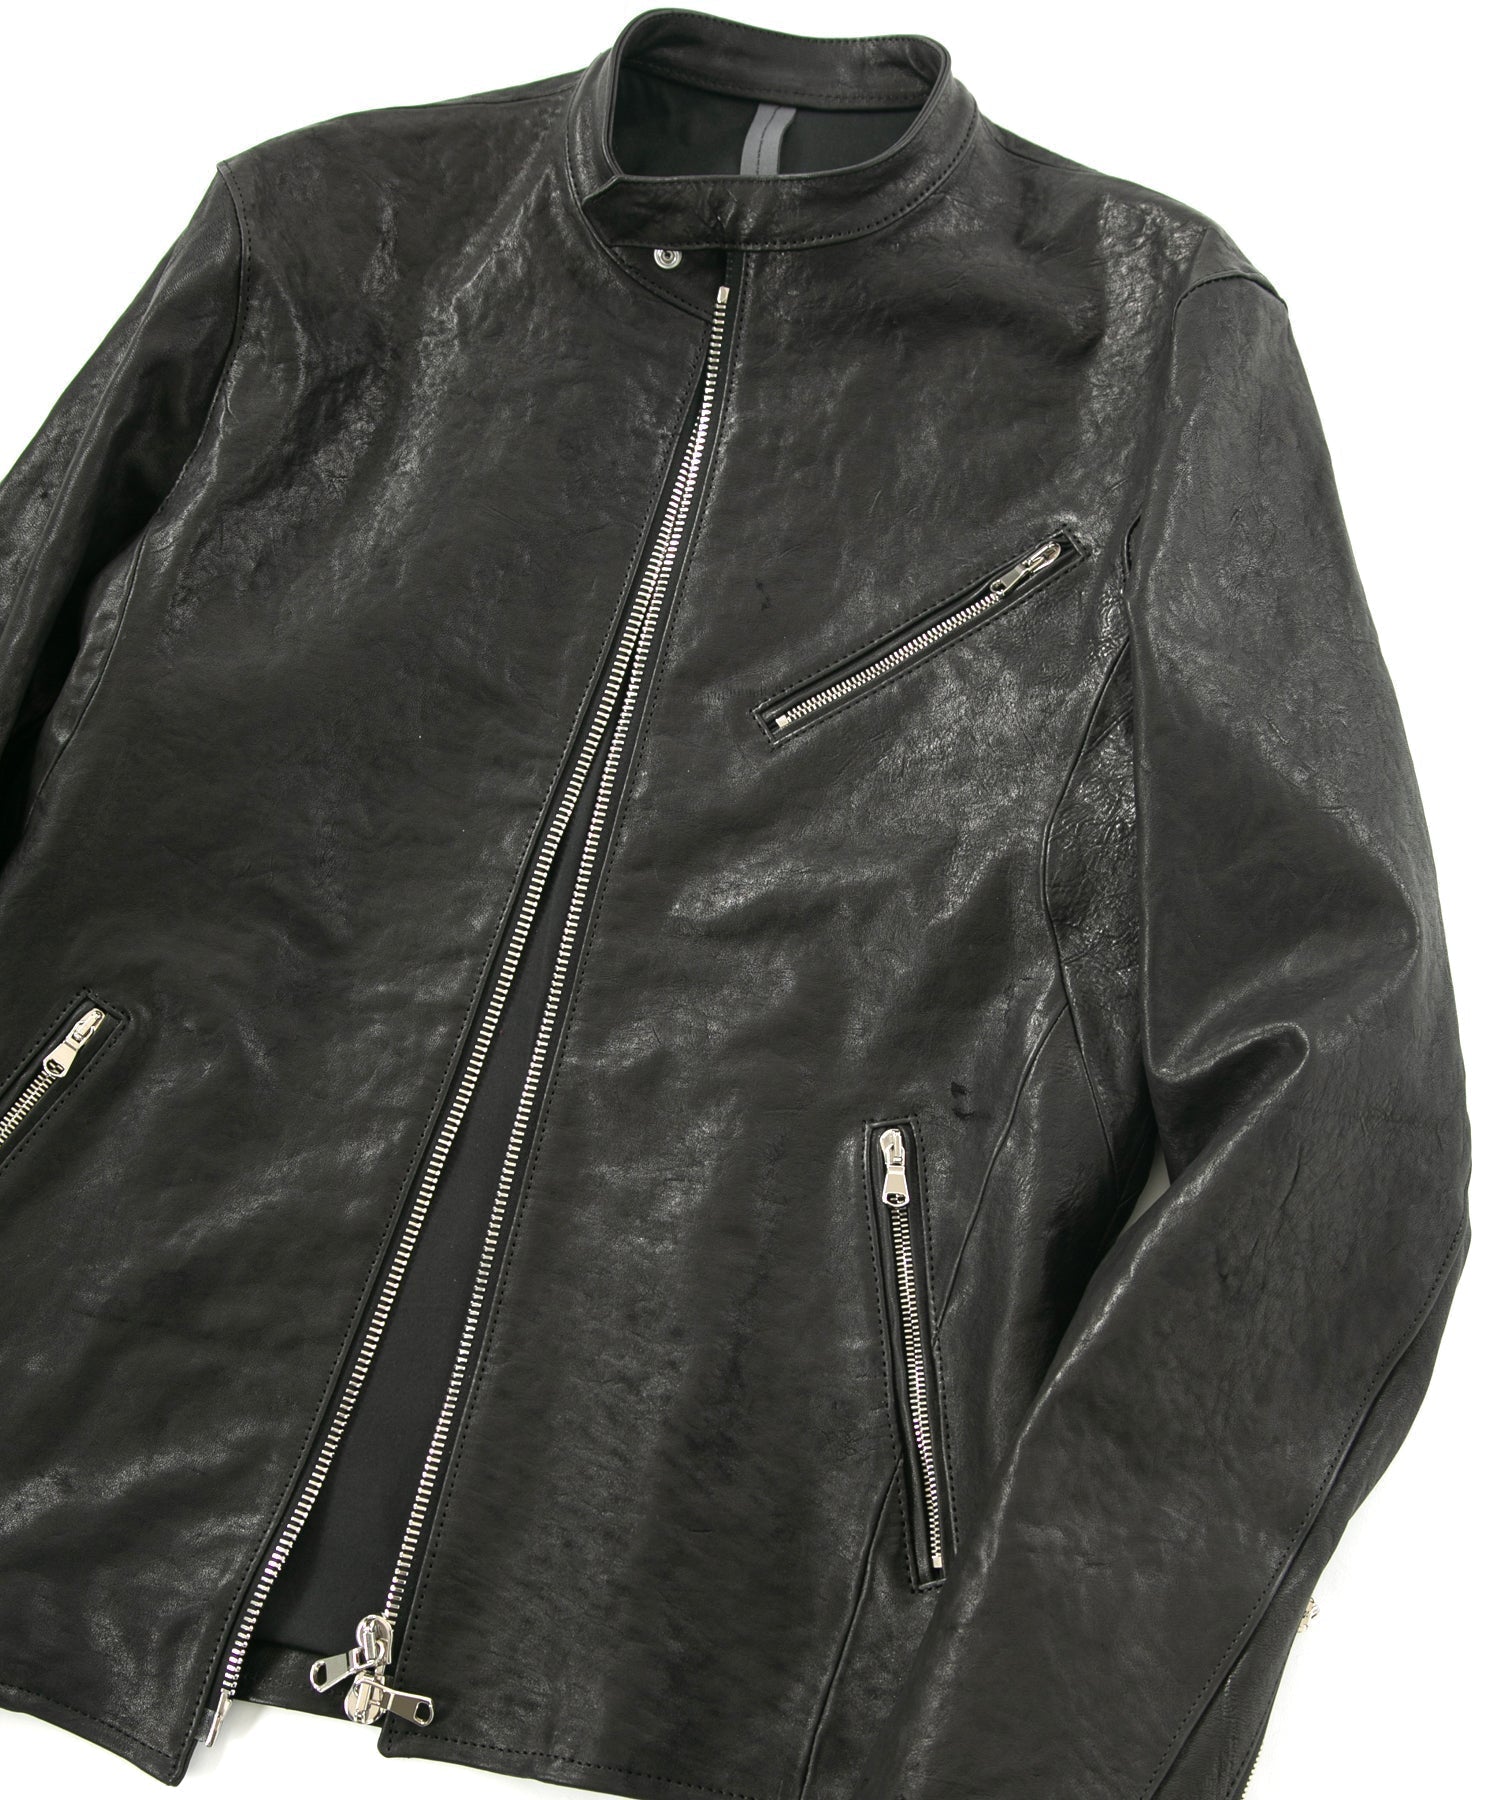 Load image into Gallery viewer, Pit Vegetable Full Tanned Shrank Horsehide SLATER Single Riders Jacket - BLACK